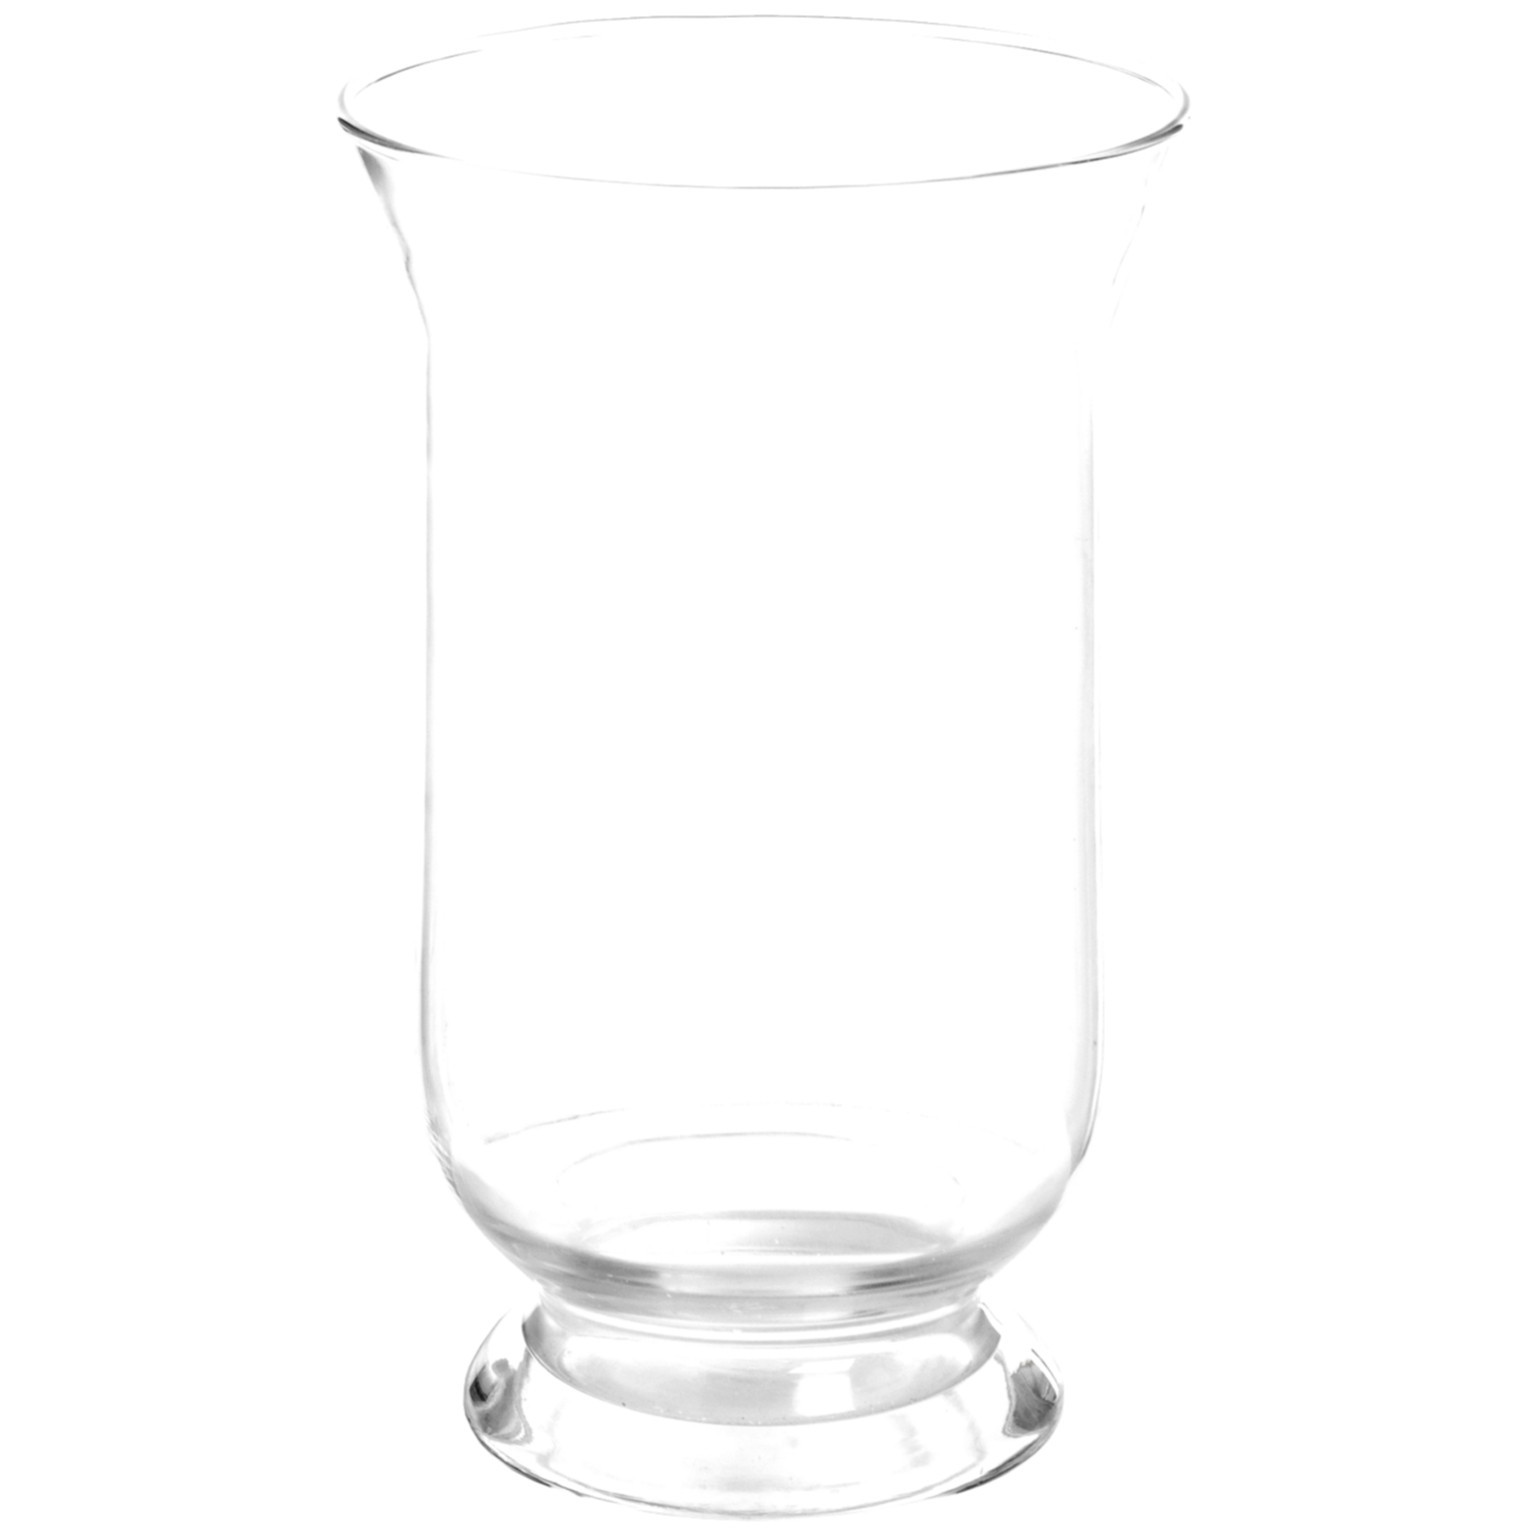 22 Fantastic Footed Glass Hurricane Vase 2024 free download footed glass hurricane vase of why you should not go to glass vases wholesale glass vases within large hurricane vases wholesale glass vases wholesale